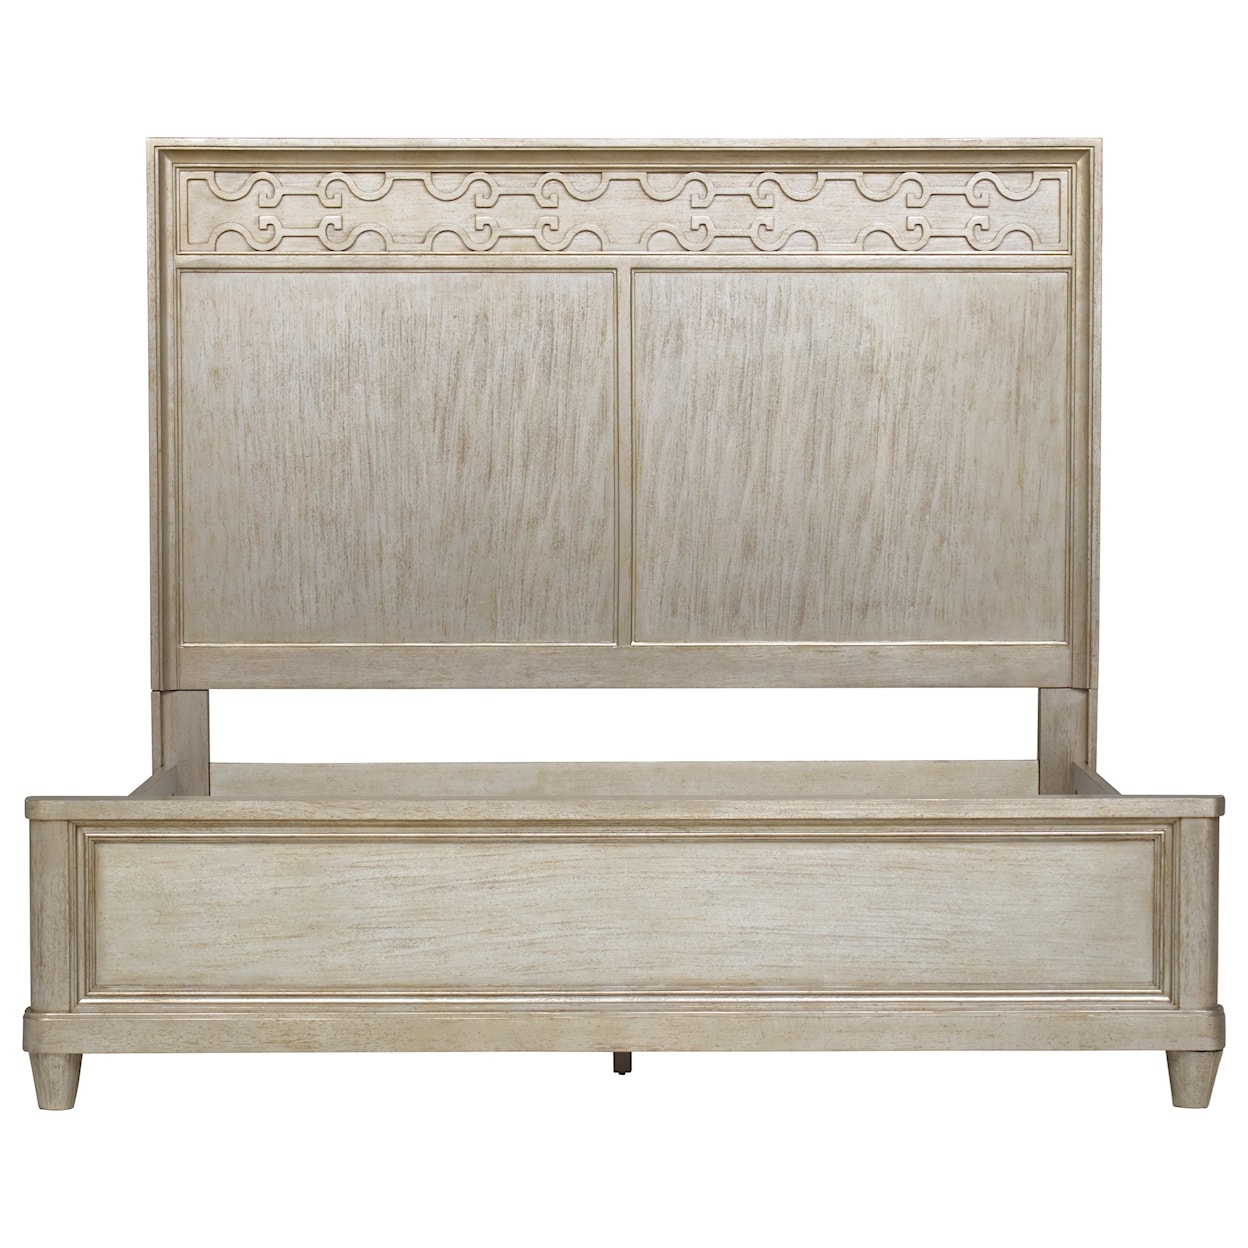 A.R.T. Furniture Inc Morrissey King Cashin Panel Bed 